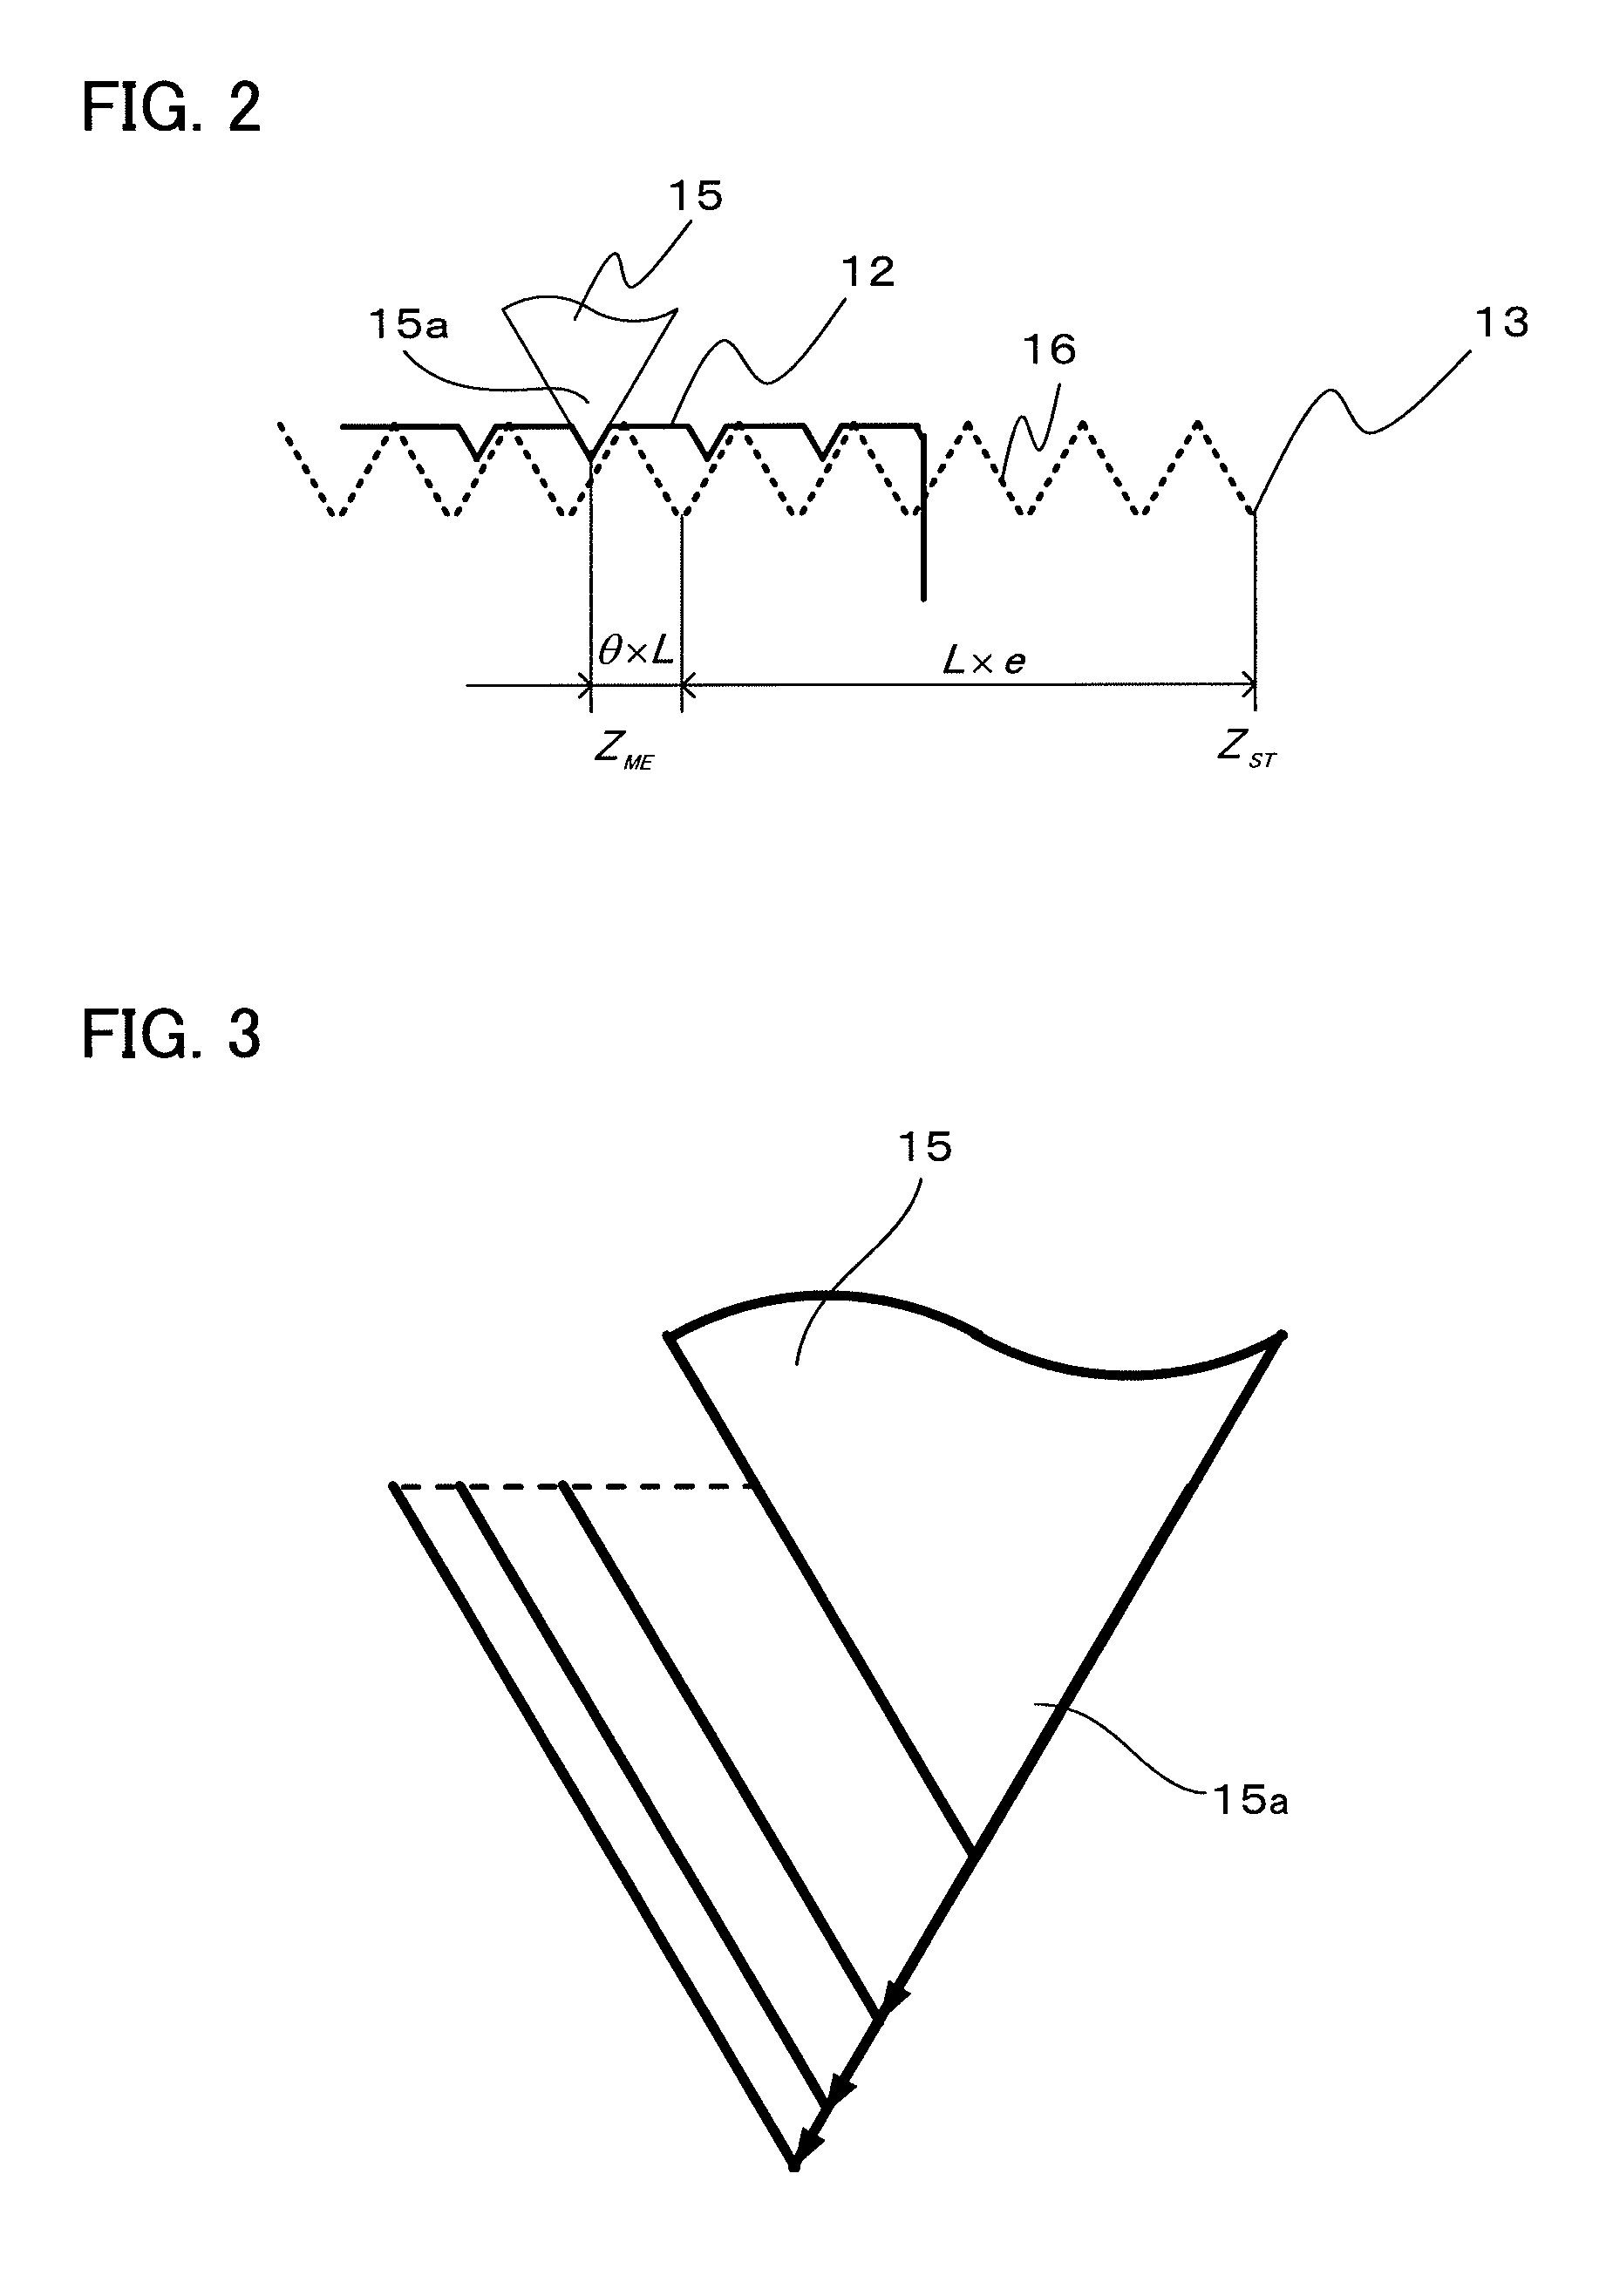 Numerical controller having function of re-machining thread cutting cycle